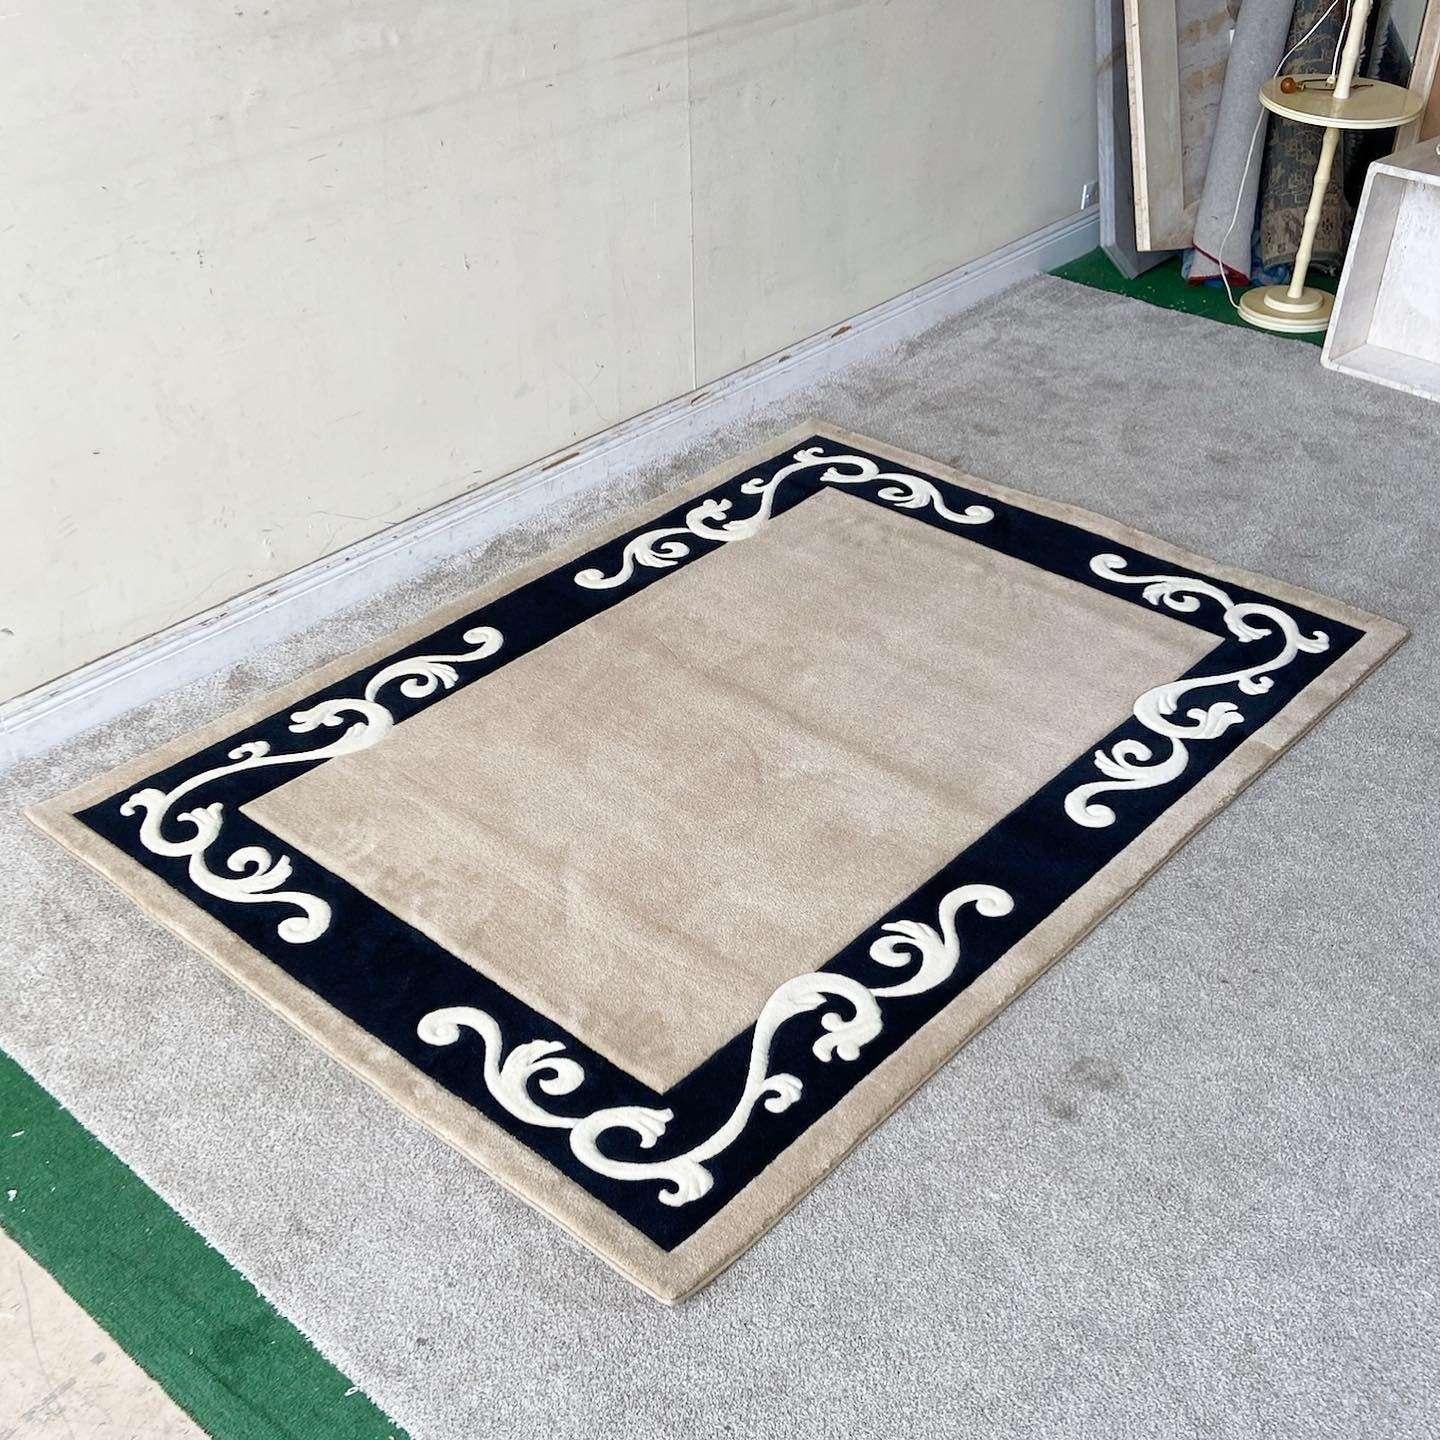 Amazing vintage postmodern rectangular area rug. Features a tan interior with a black border with white vining around within a tan outer edge.

Rug 16
